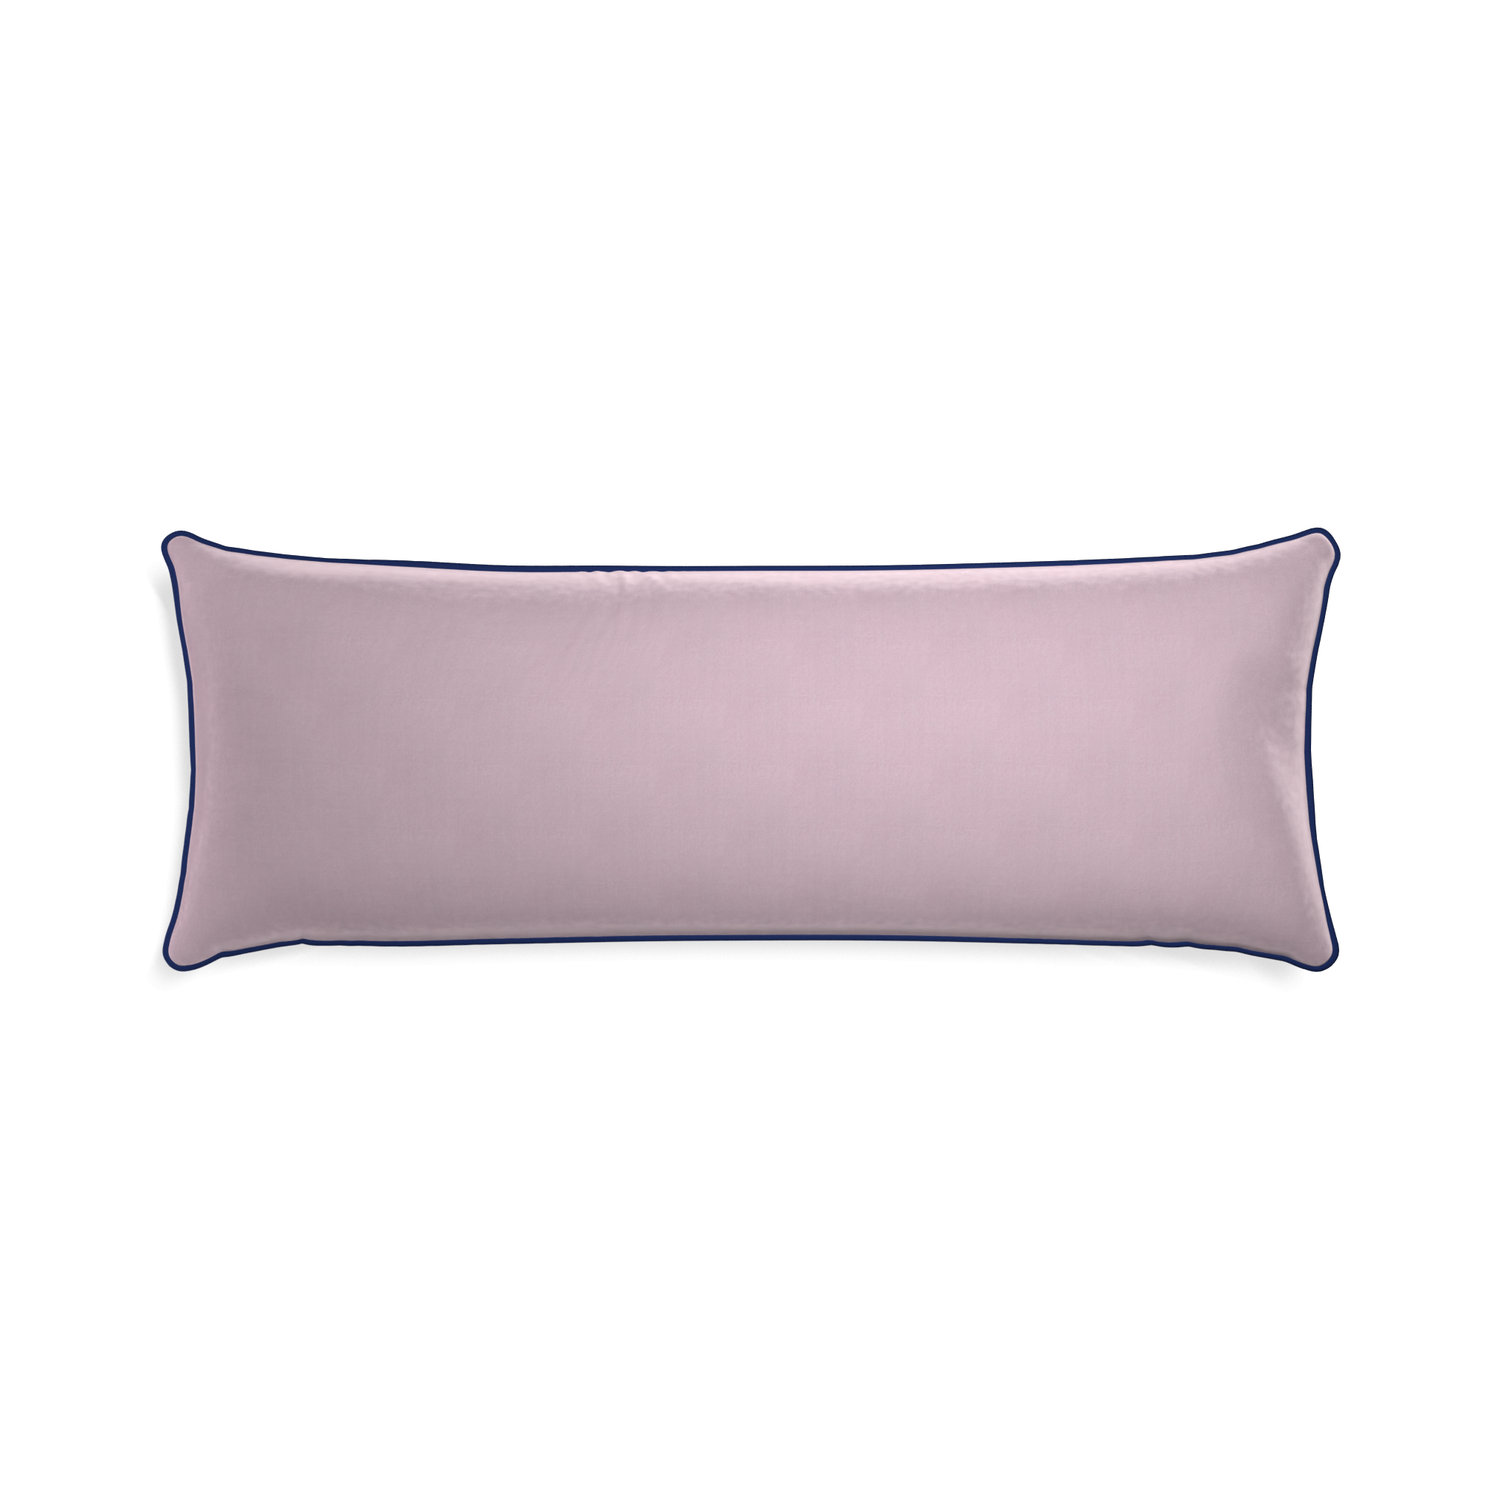 rectangle lilac velvet pillow with navy blue piping